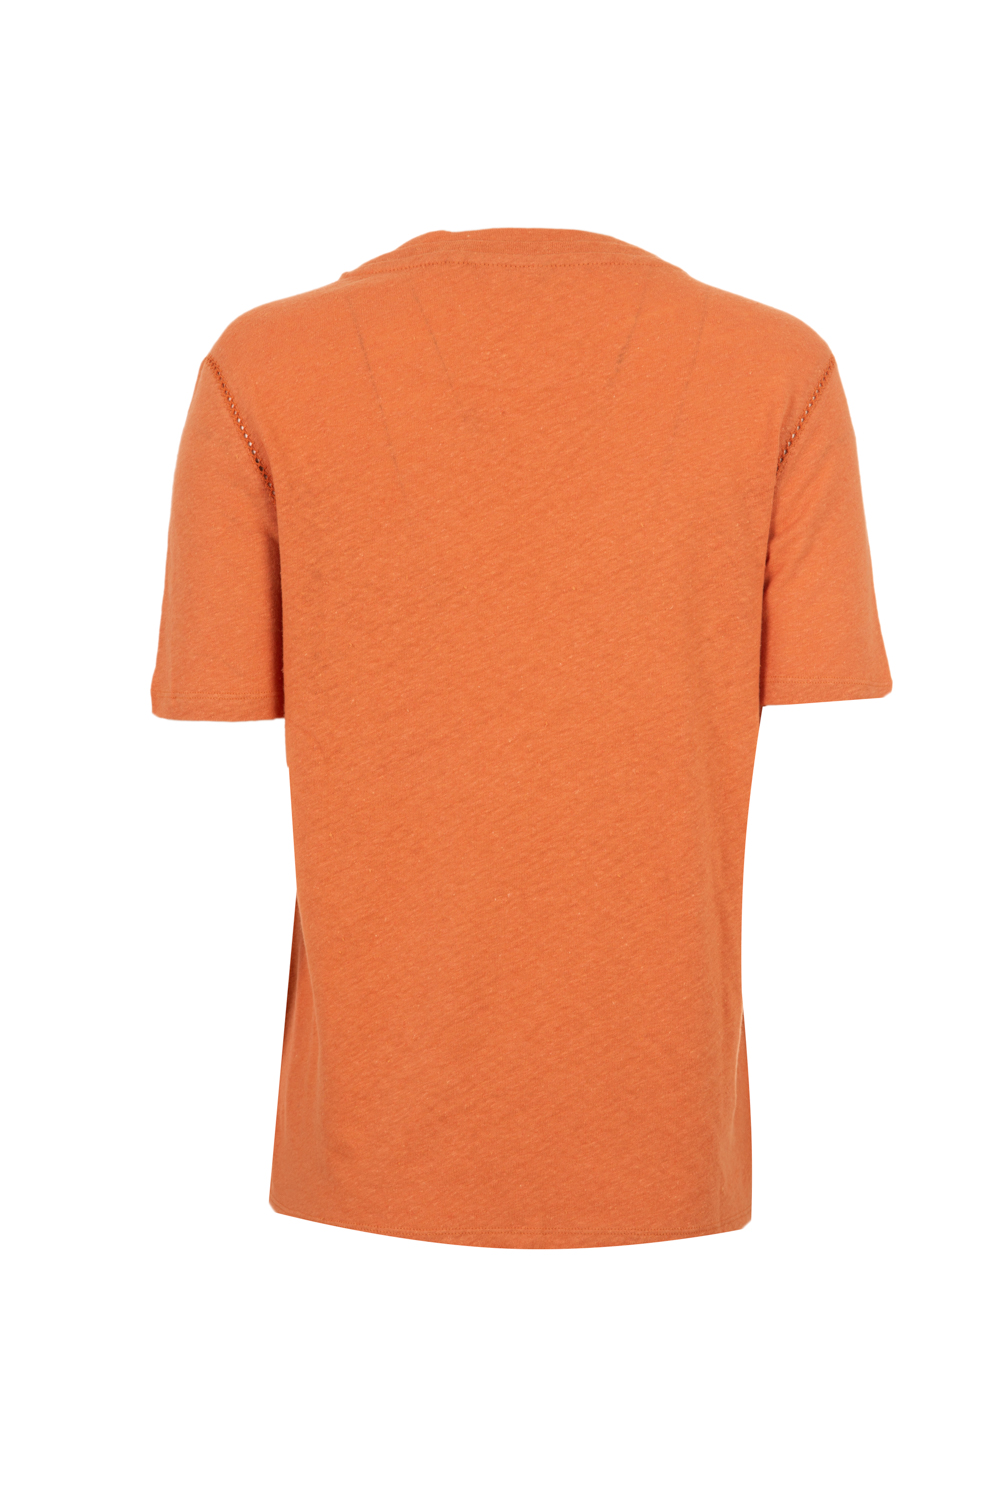 Lin and Cotton T-Shirt with Seam Details